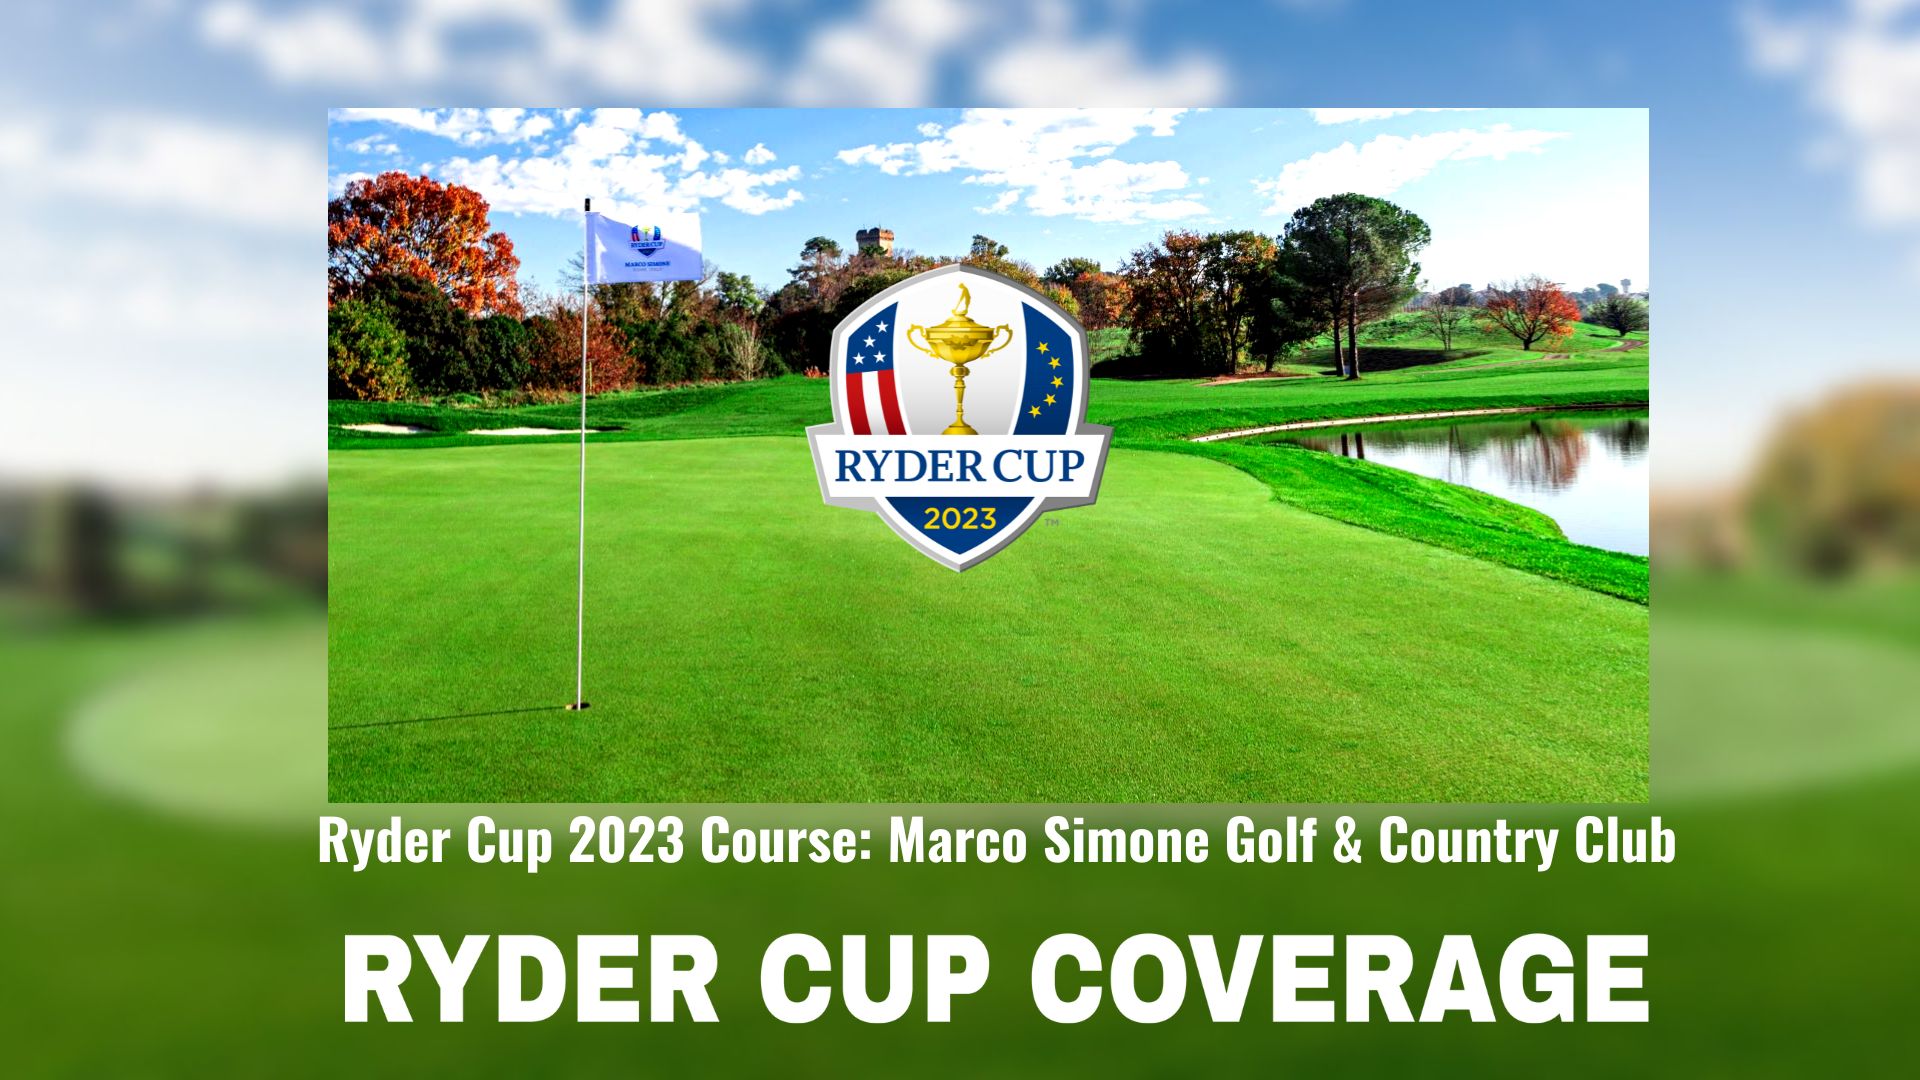 Ryder Cup 2023 Course Marco Simone Golf & Country Club